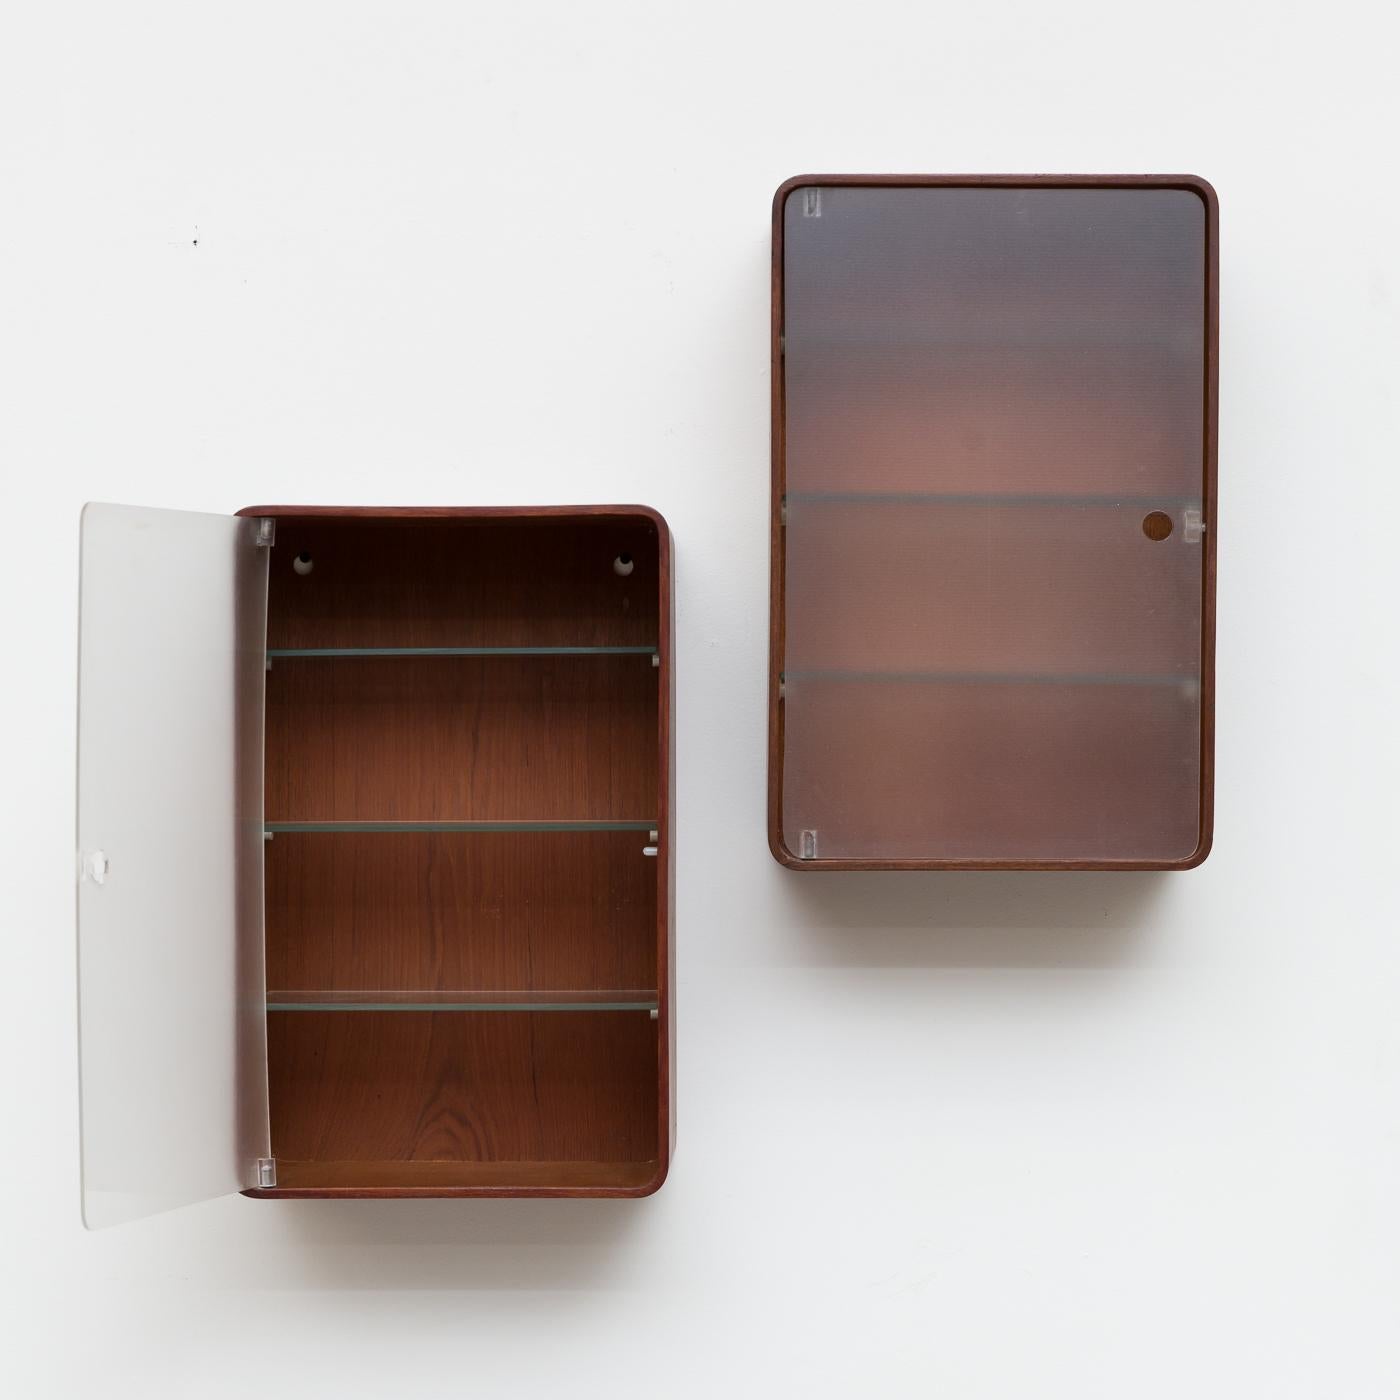 Rare midcentury wall mount medicine cabinet. Two available, slightly different wood colors. A= Reddish and B=Teak both have plexiglass doors with finger cutouts. Ribbed glass shelves inside. Very original condition, slight bowing to the doors, open